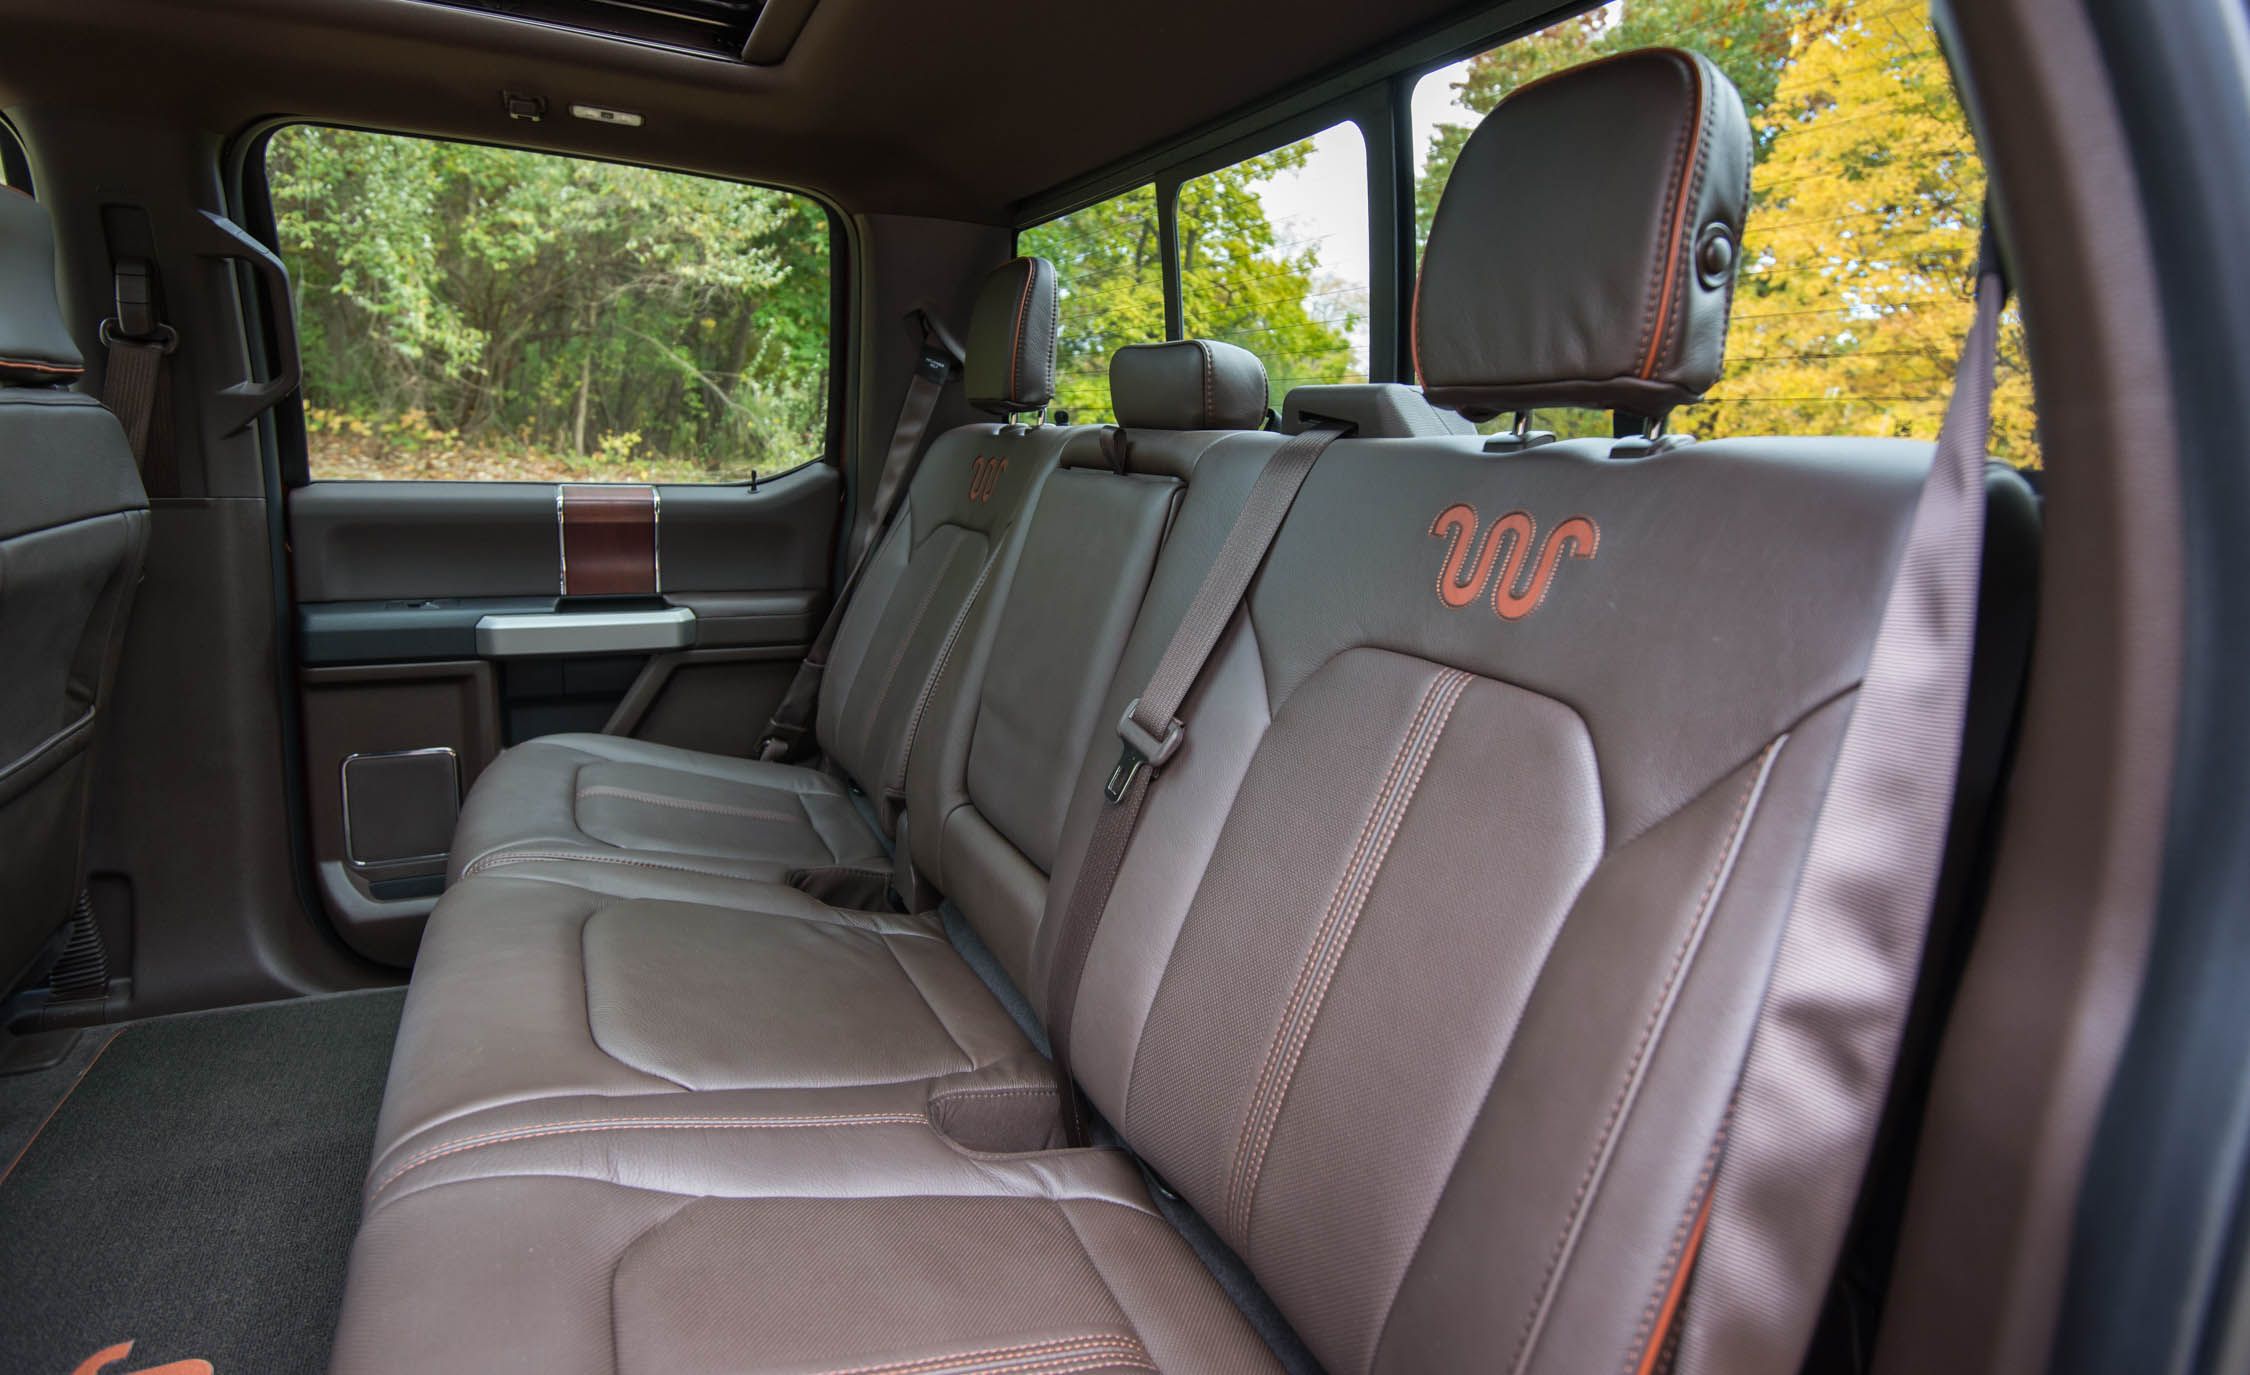 2017 Ford F 150 King Ranch Interior Seats Rear Passengers (View 15 of 50)